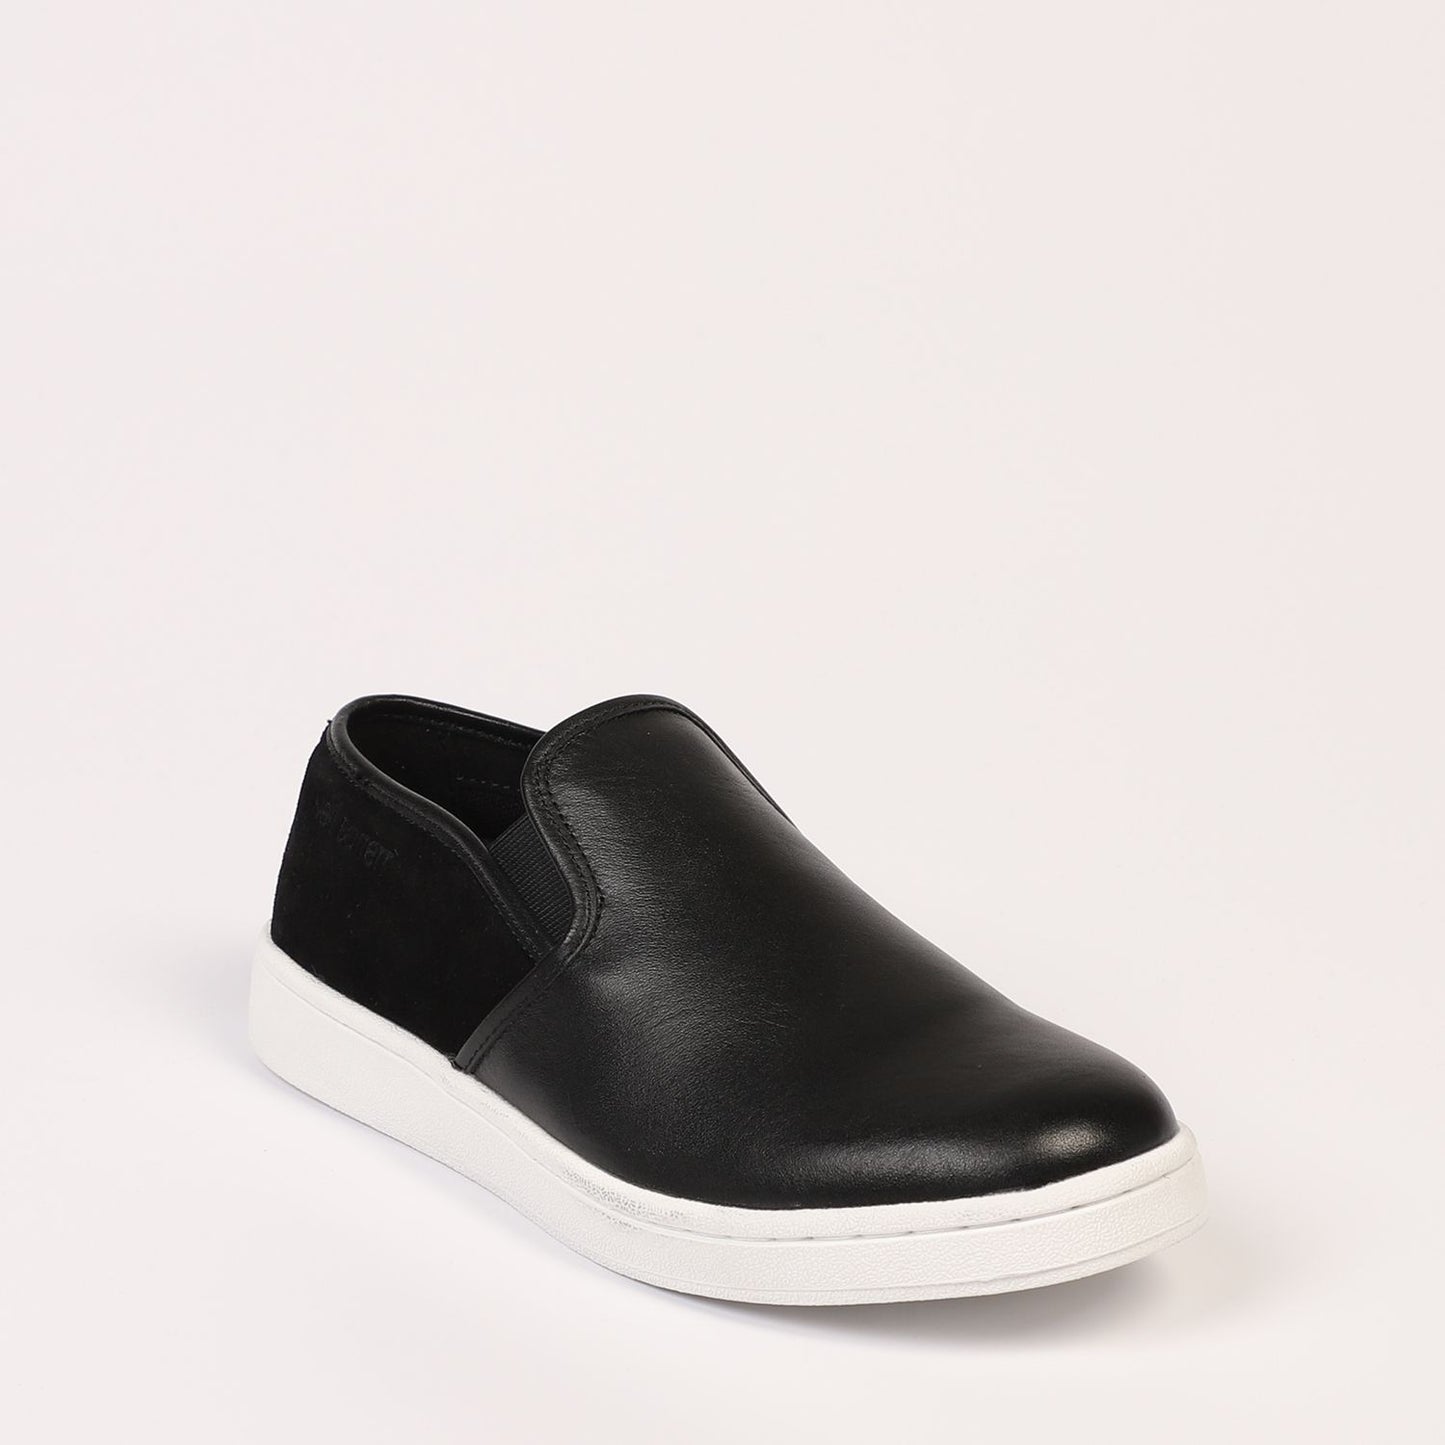 Chic Suede Slip-On Sneakers with Elastic Accents